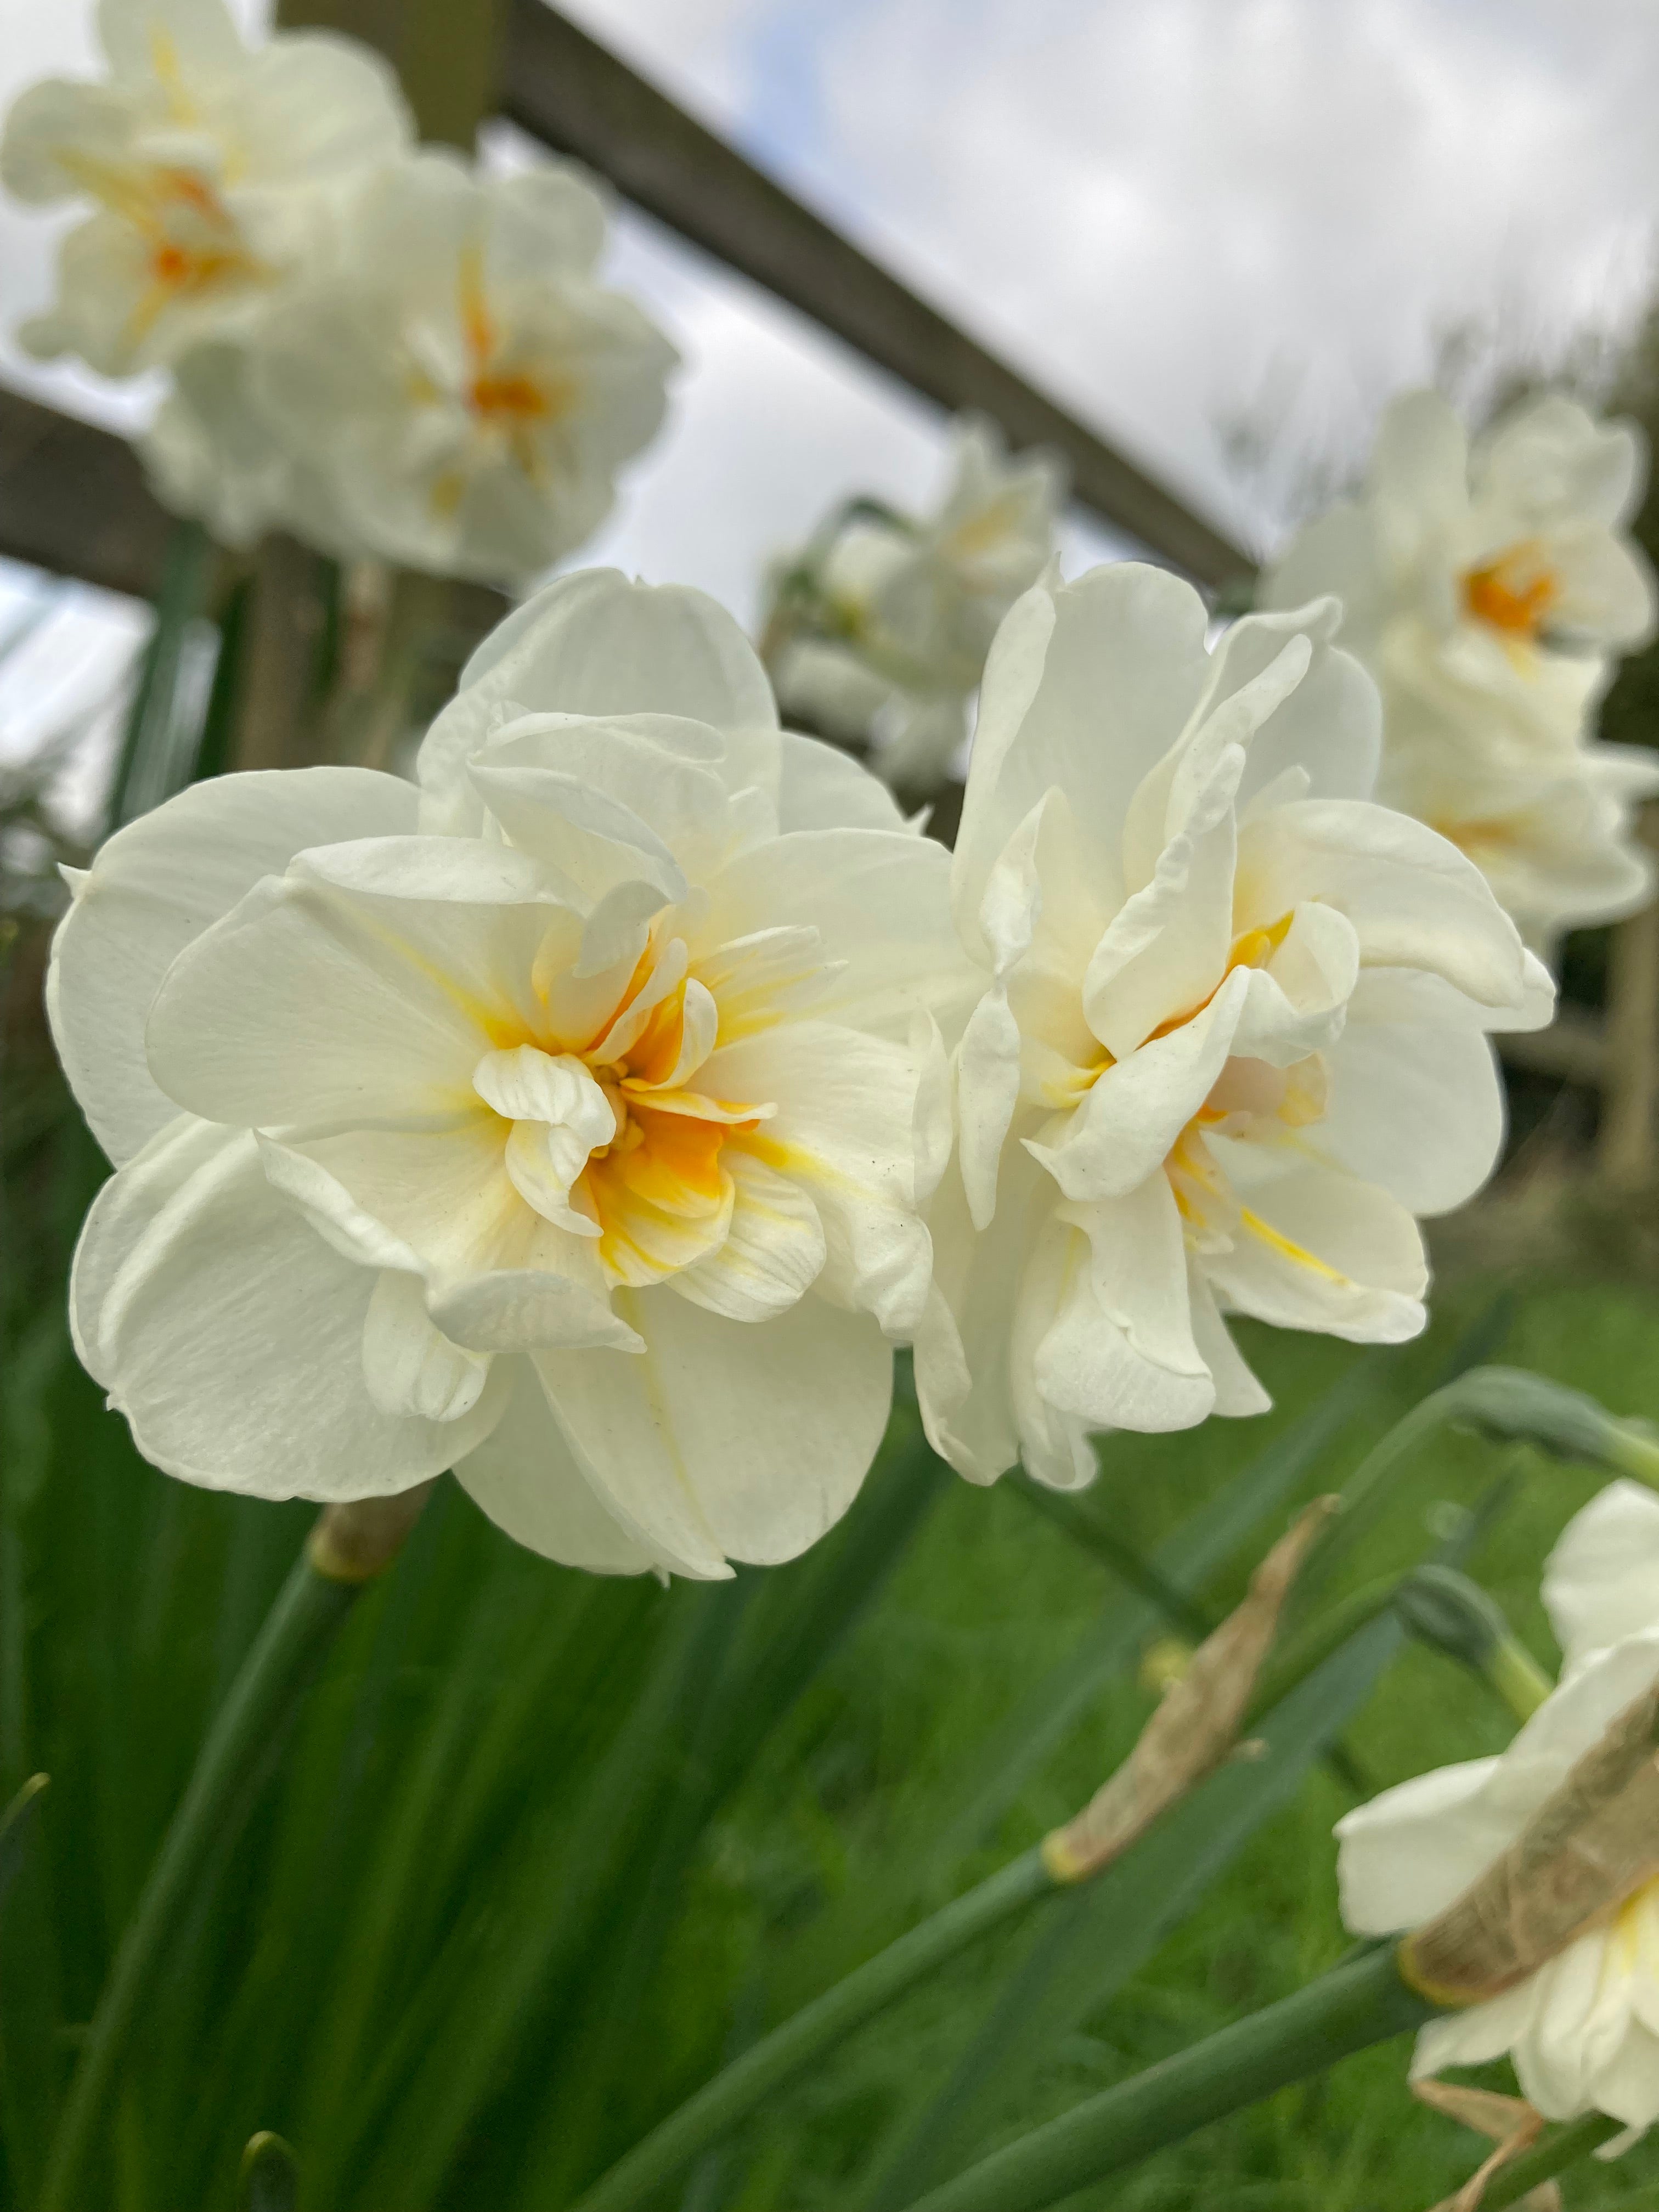 Daffodil 'Sir Winston Churchill' Variety (Bulbs To Plant Yourself) Free UK Postage